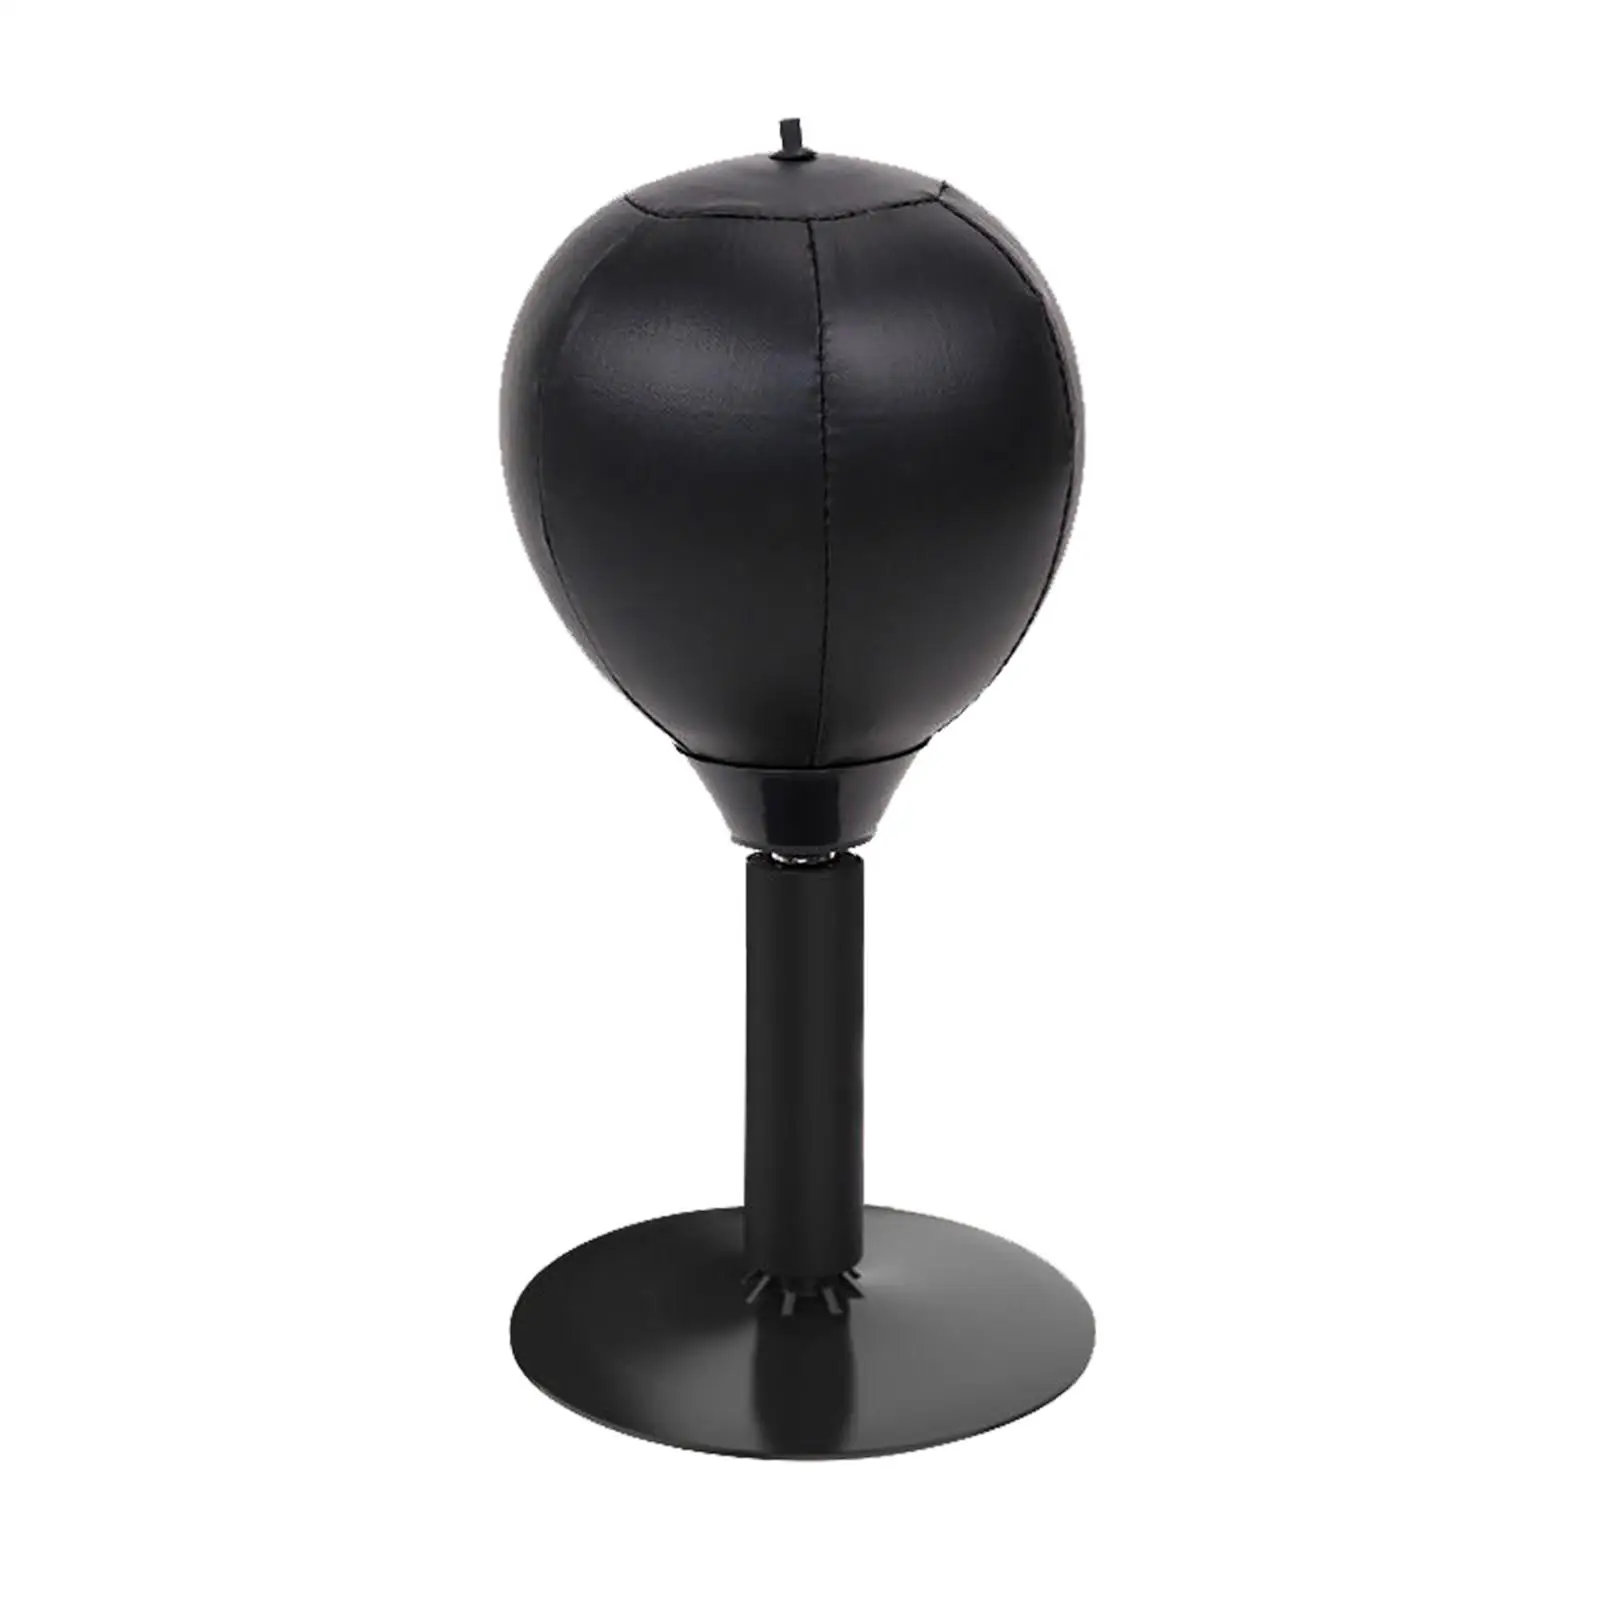 Punching Bag Speed Ball Suction Cup Desktop Boxing Ball for Practice Exercise